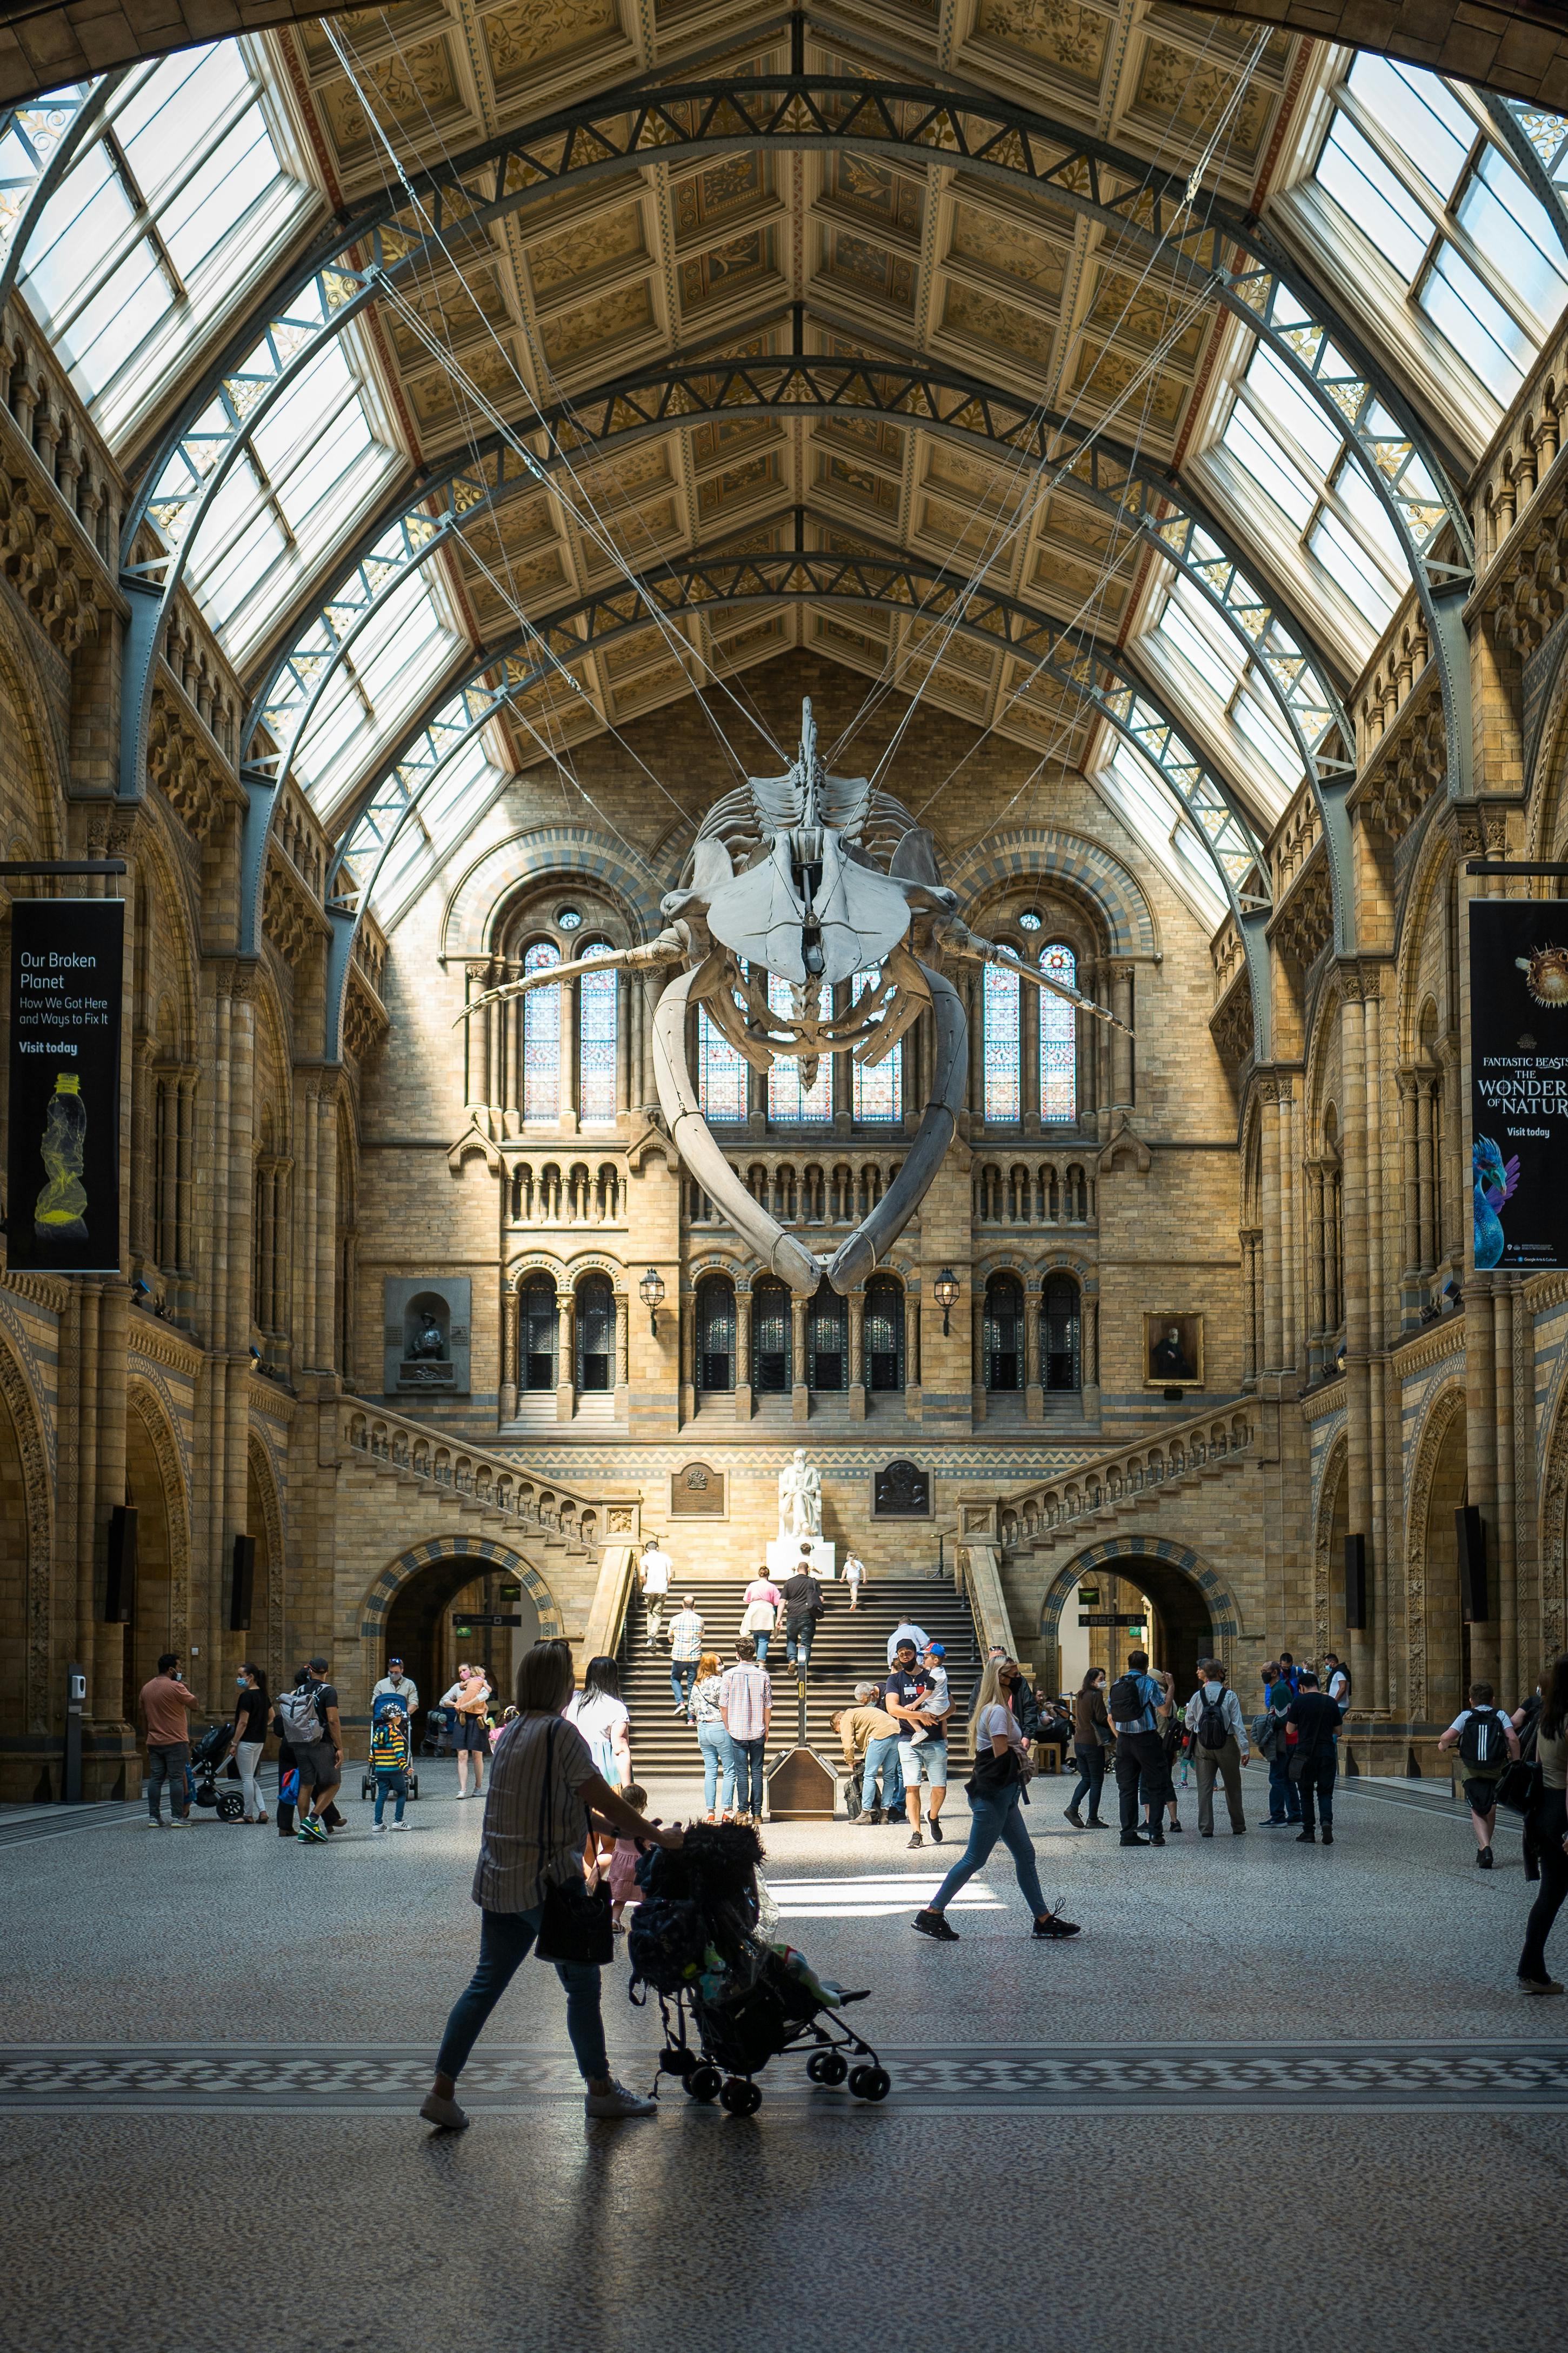 The interior of London’s Natural History Museum’s atrium. Light cascades in through windows in the ceiling; a blue whale’s skeleton is in the center of the frame, with dozens of people walking around the atrium and looking at the exhibits.